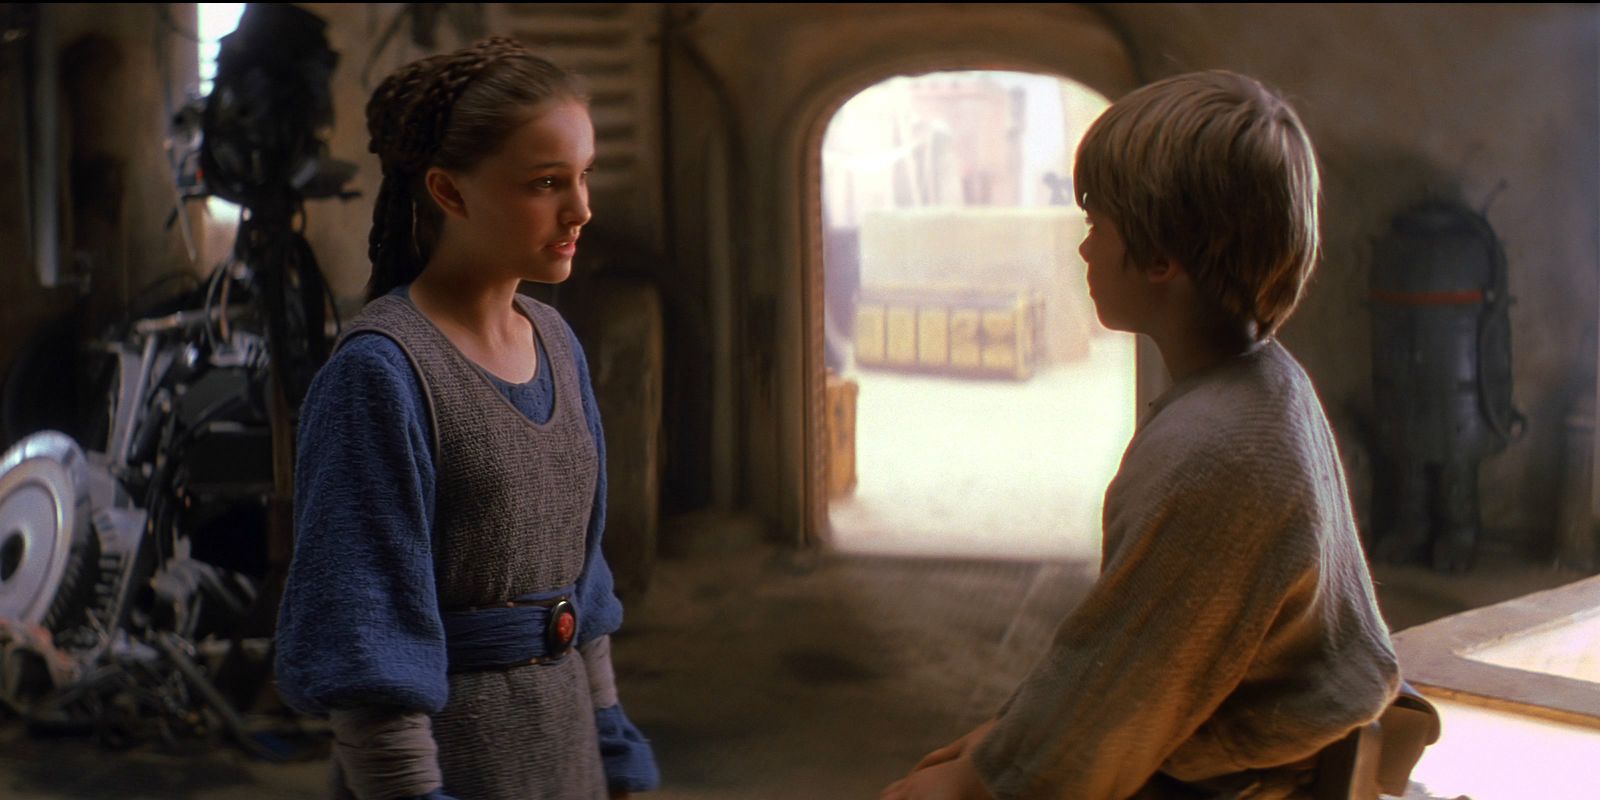 Star Wars 10 People That Would Have Been Better For Padme Than Anakin